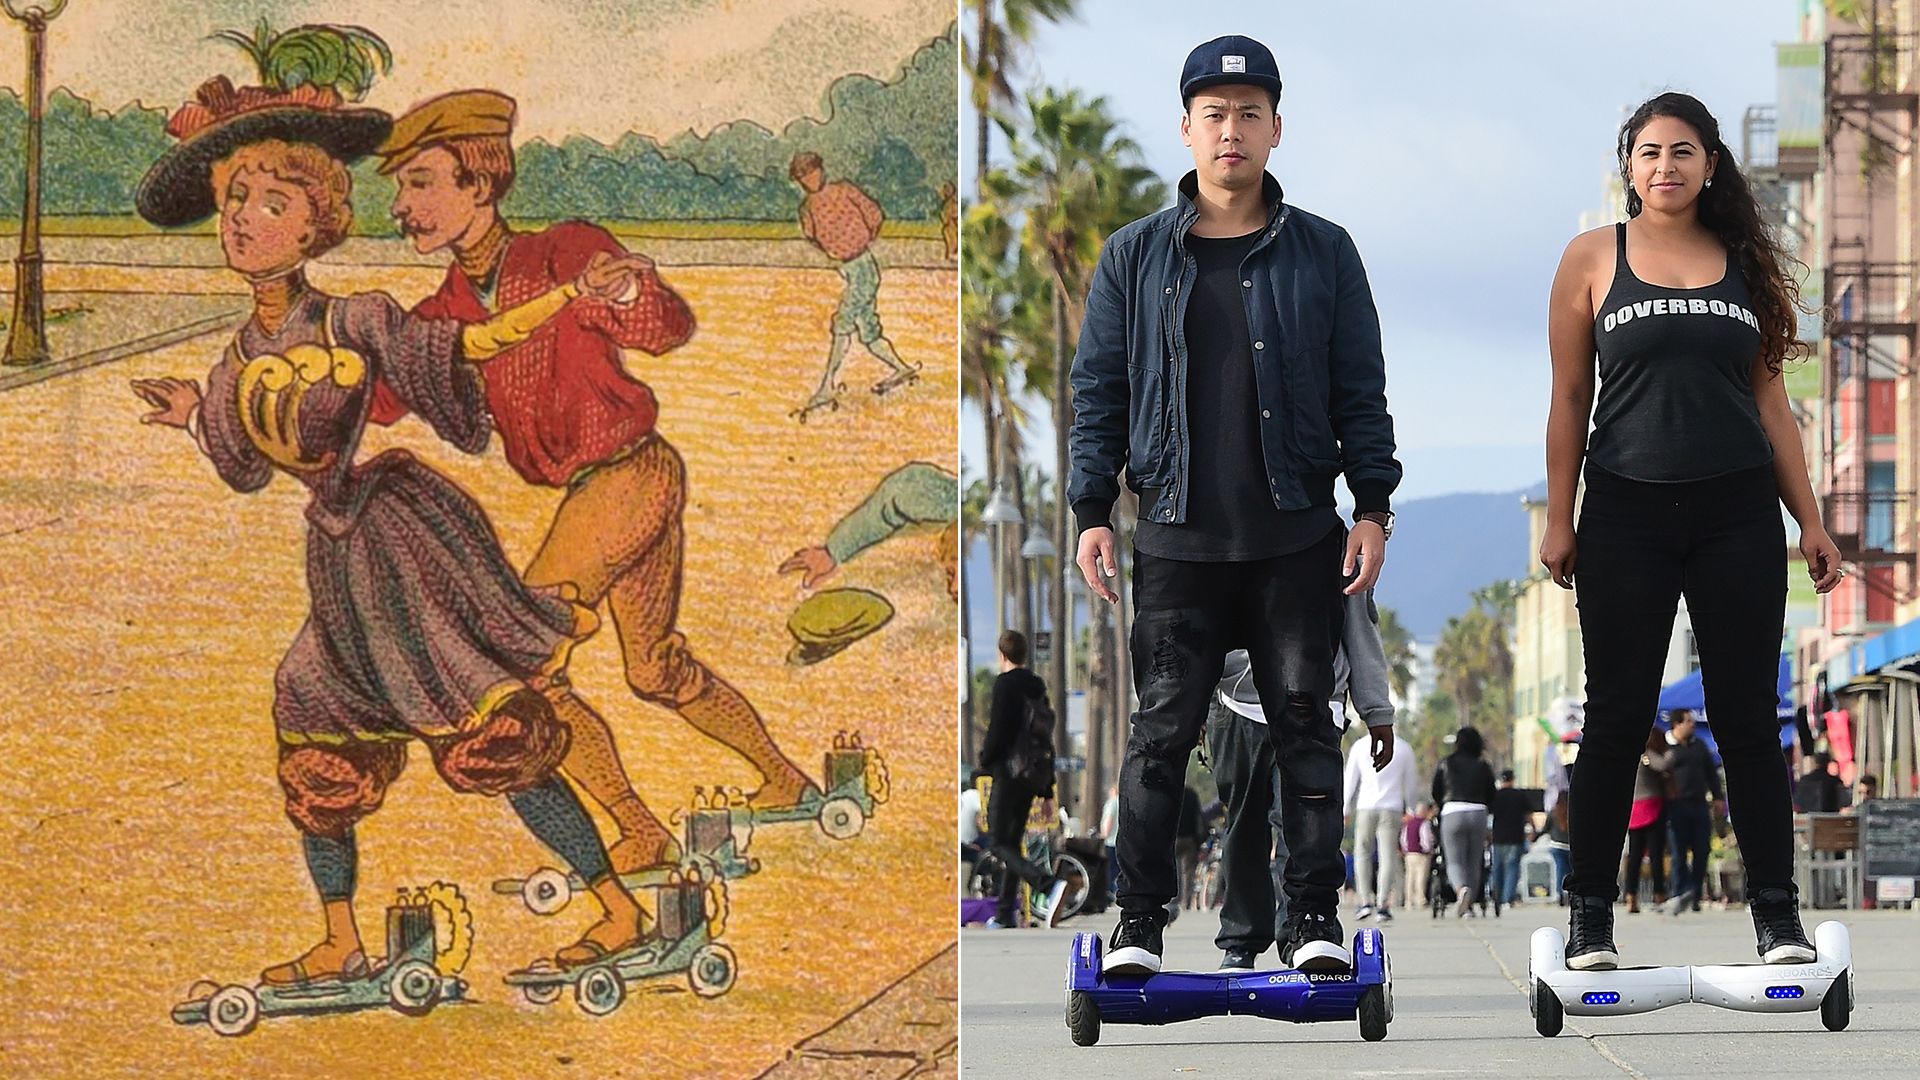 A diptych showing people on electric rollerskates and hoverboards.